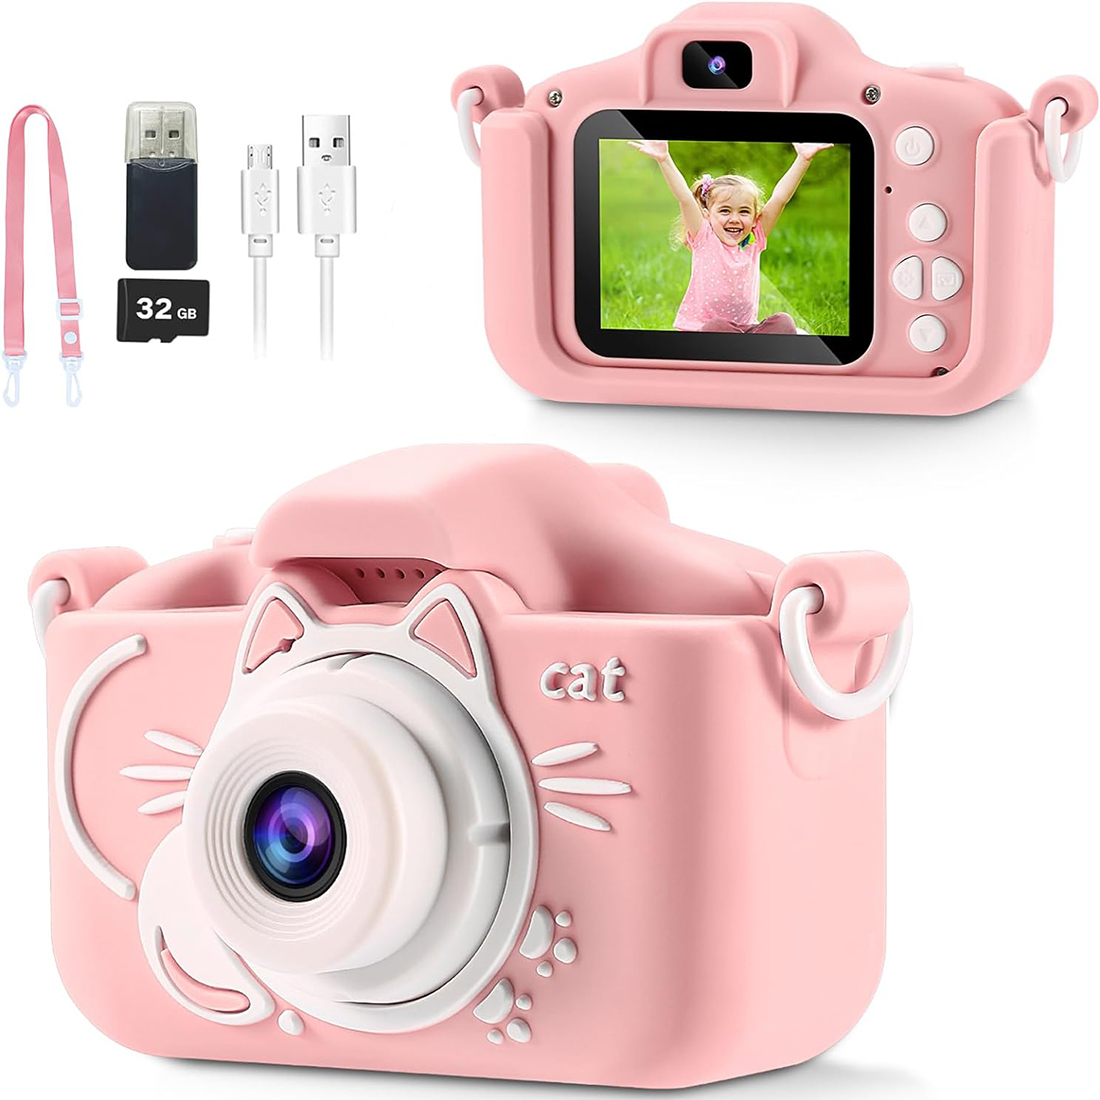 Kids Camera for Girls, 2 Lens Selfie Kids Camera,HD Kids Digital Camera Toys for 4 5 6 7 8 9 Year Old Girl Christmas Birthday Gifts,MP3 Player,Camera for Kids 10-12,Toddler Camera with 32GB-Card Pink